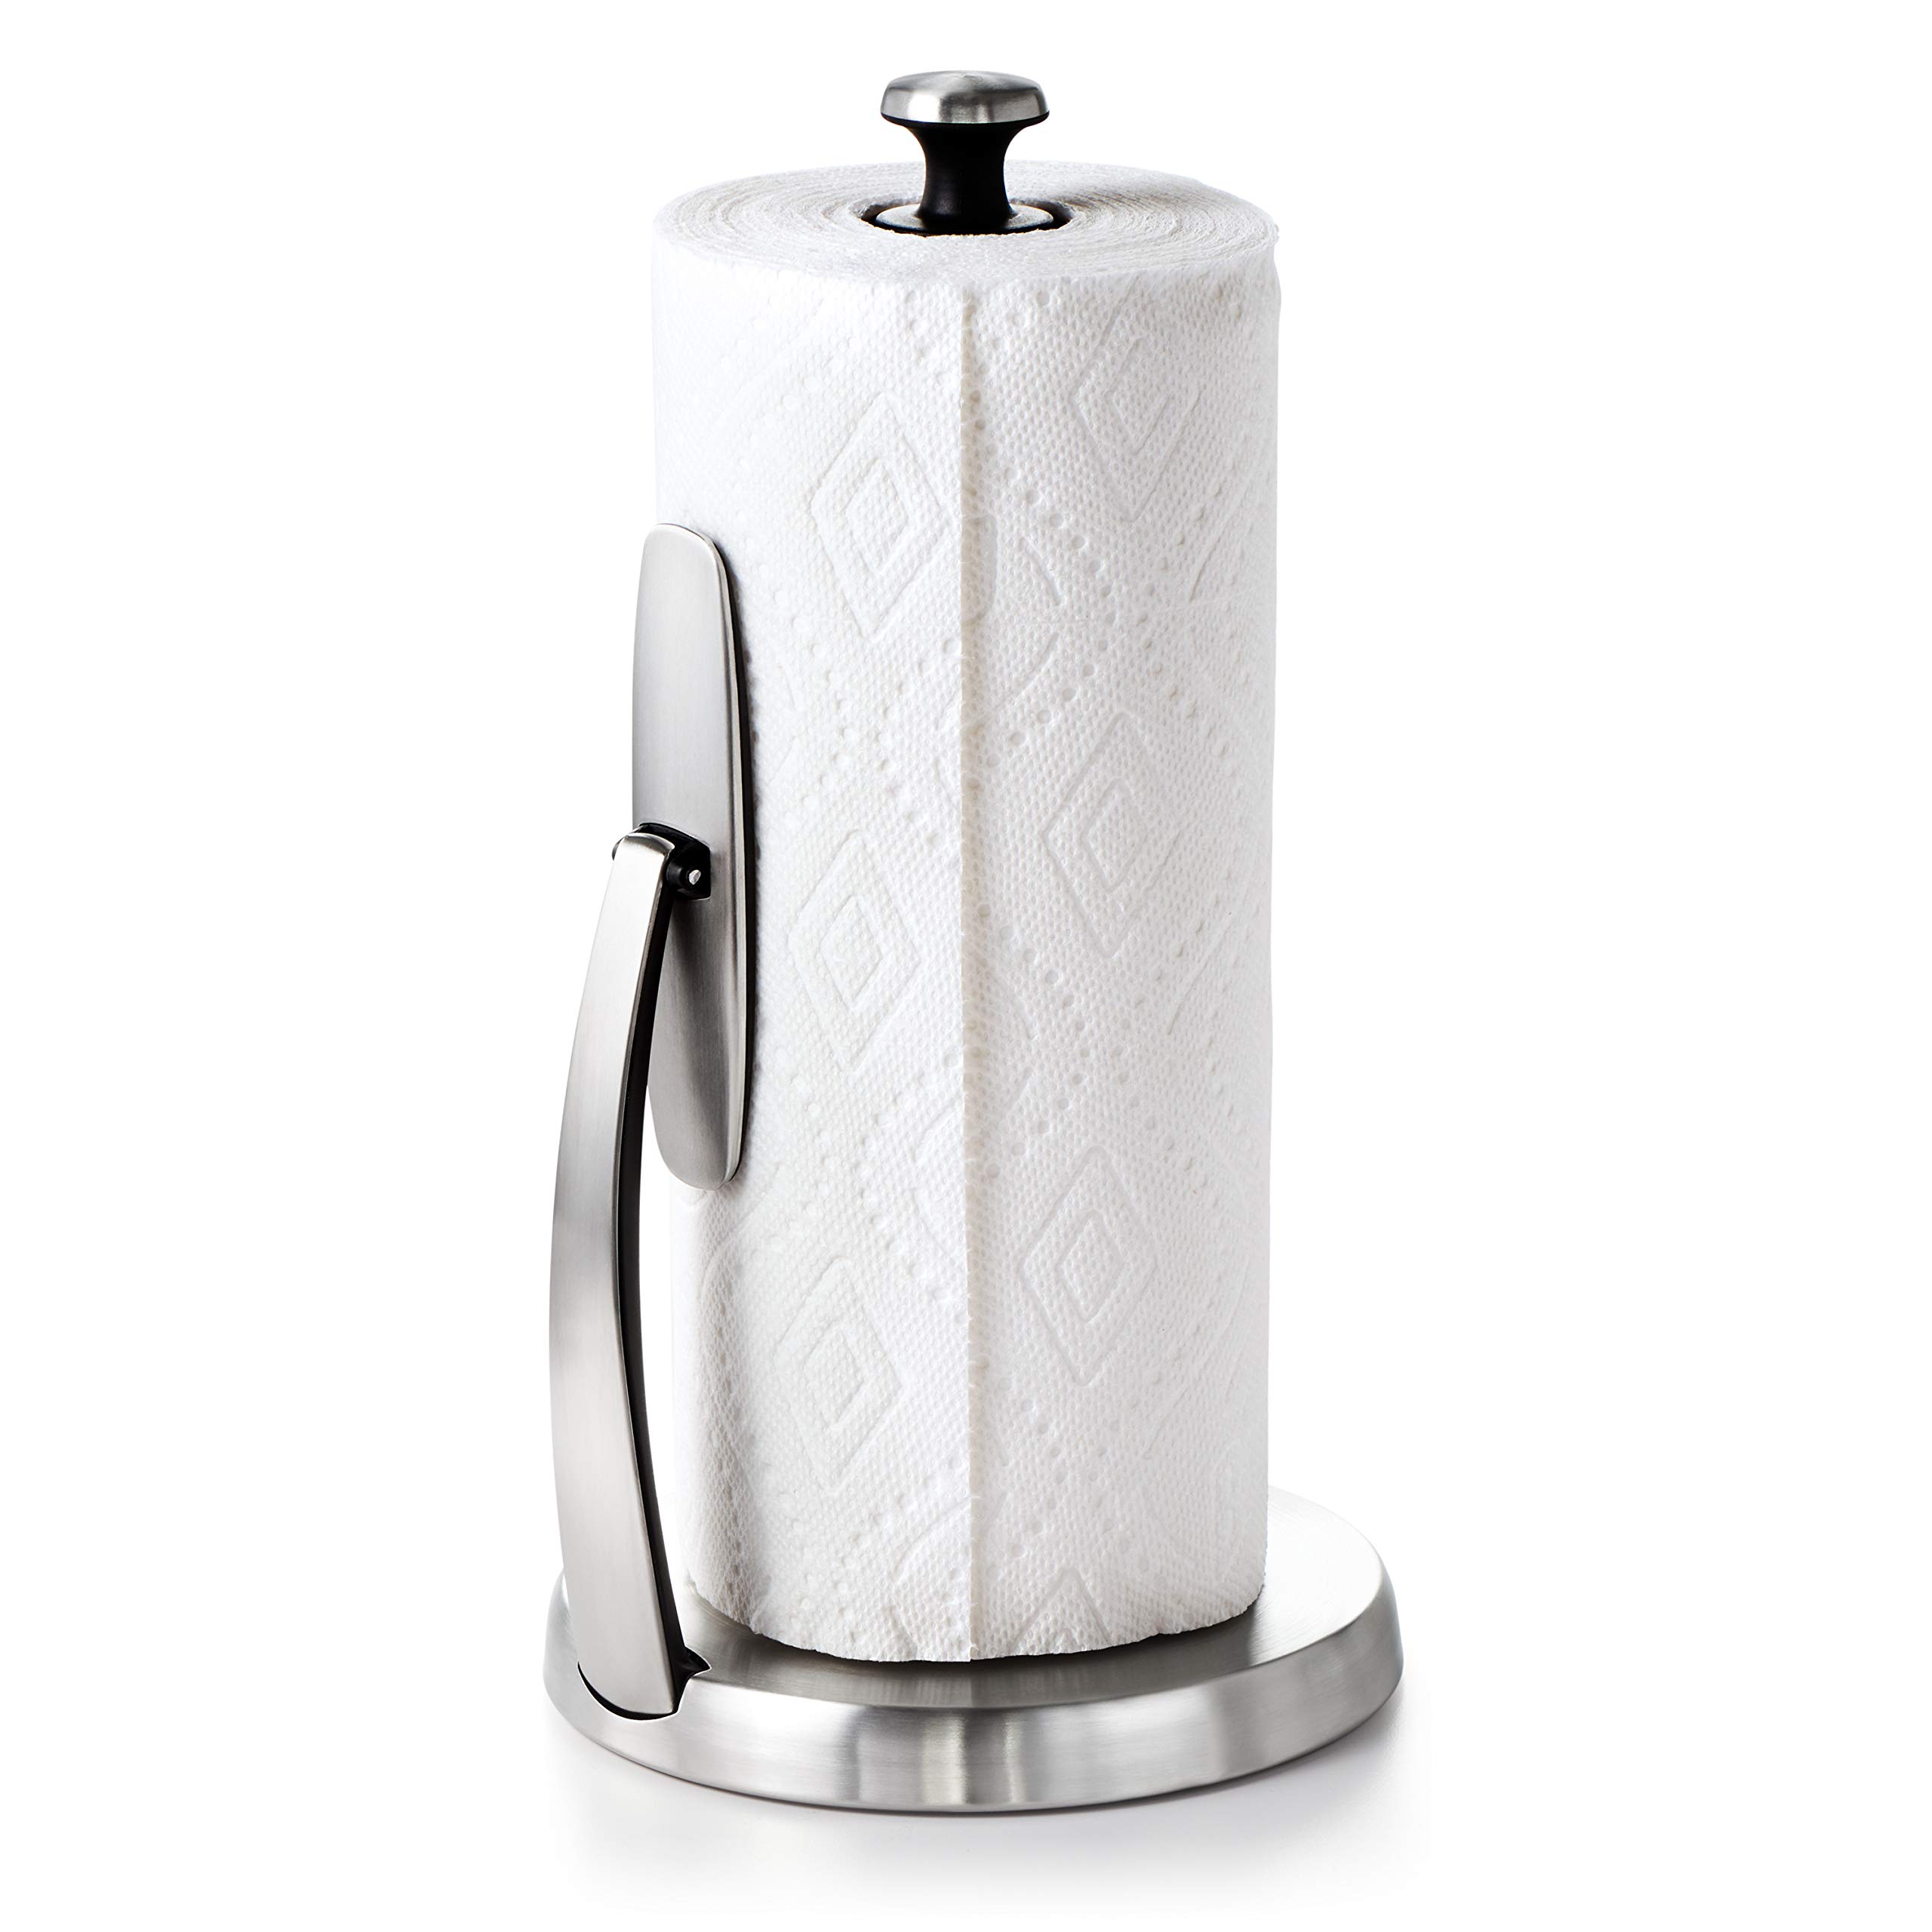 OXO Good Grips SimplyTear Paper Towel Holder - Stainless Steel (Silver & Black)